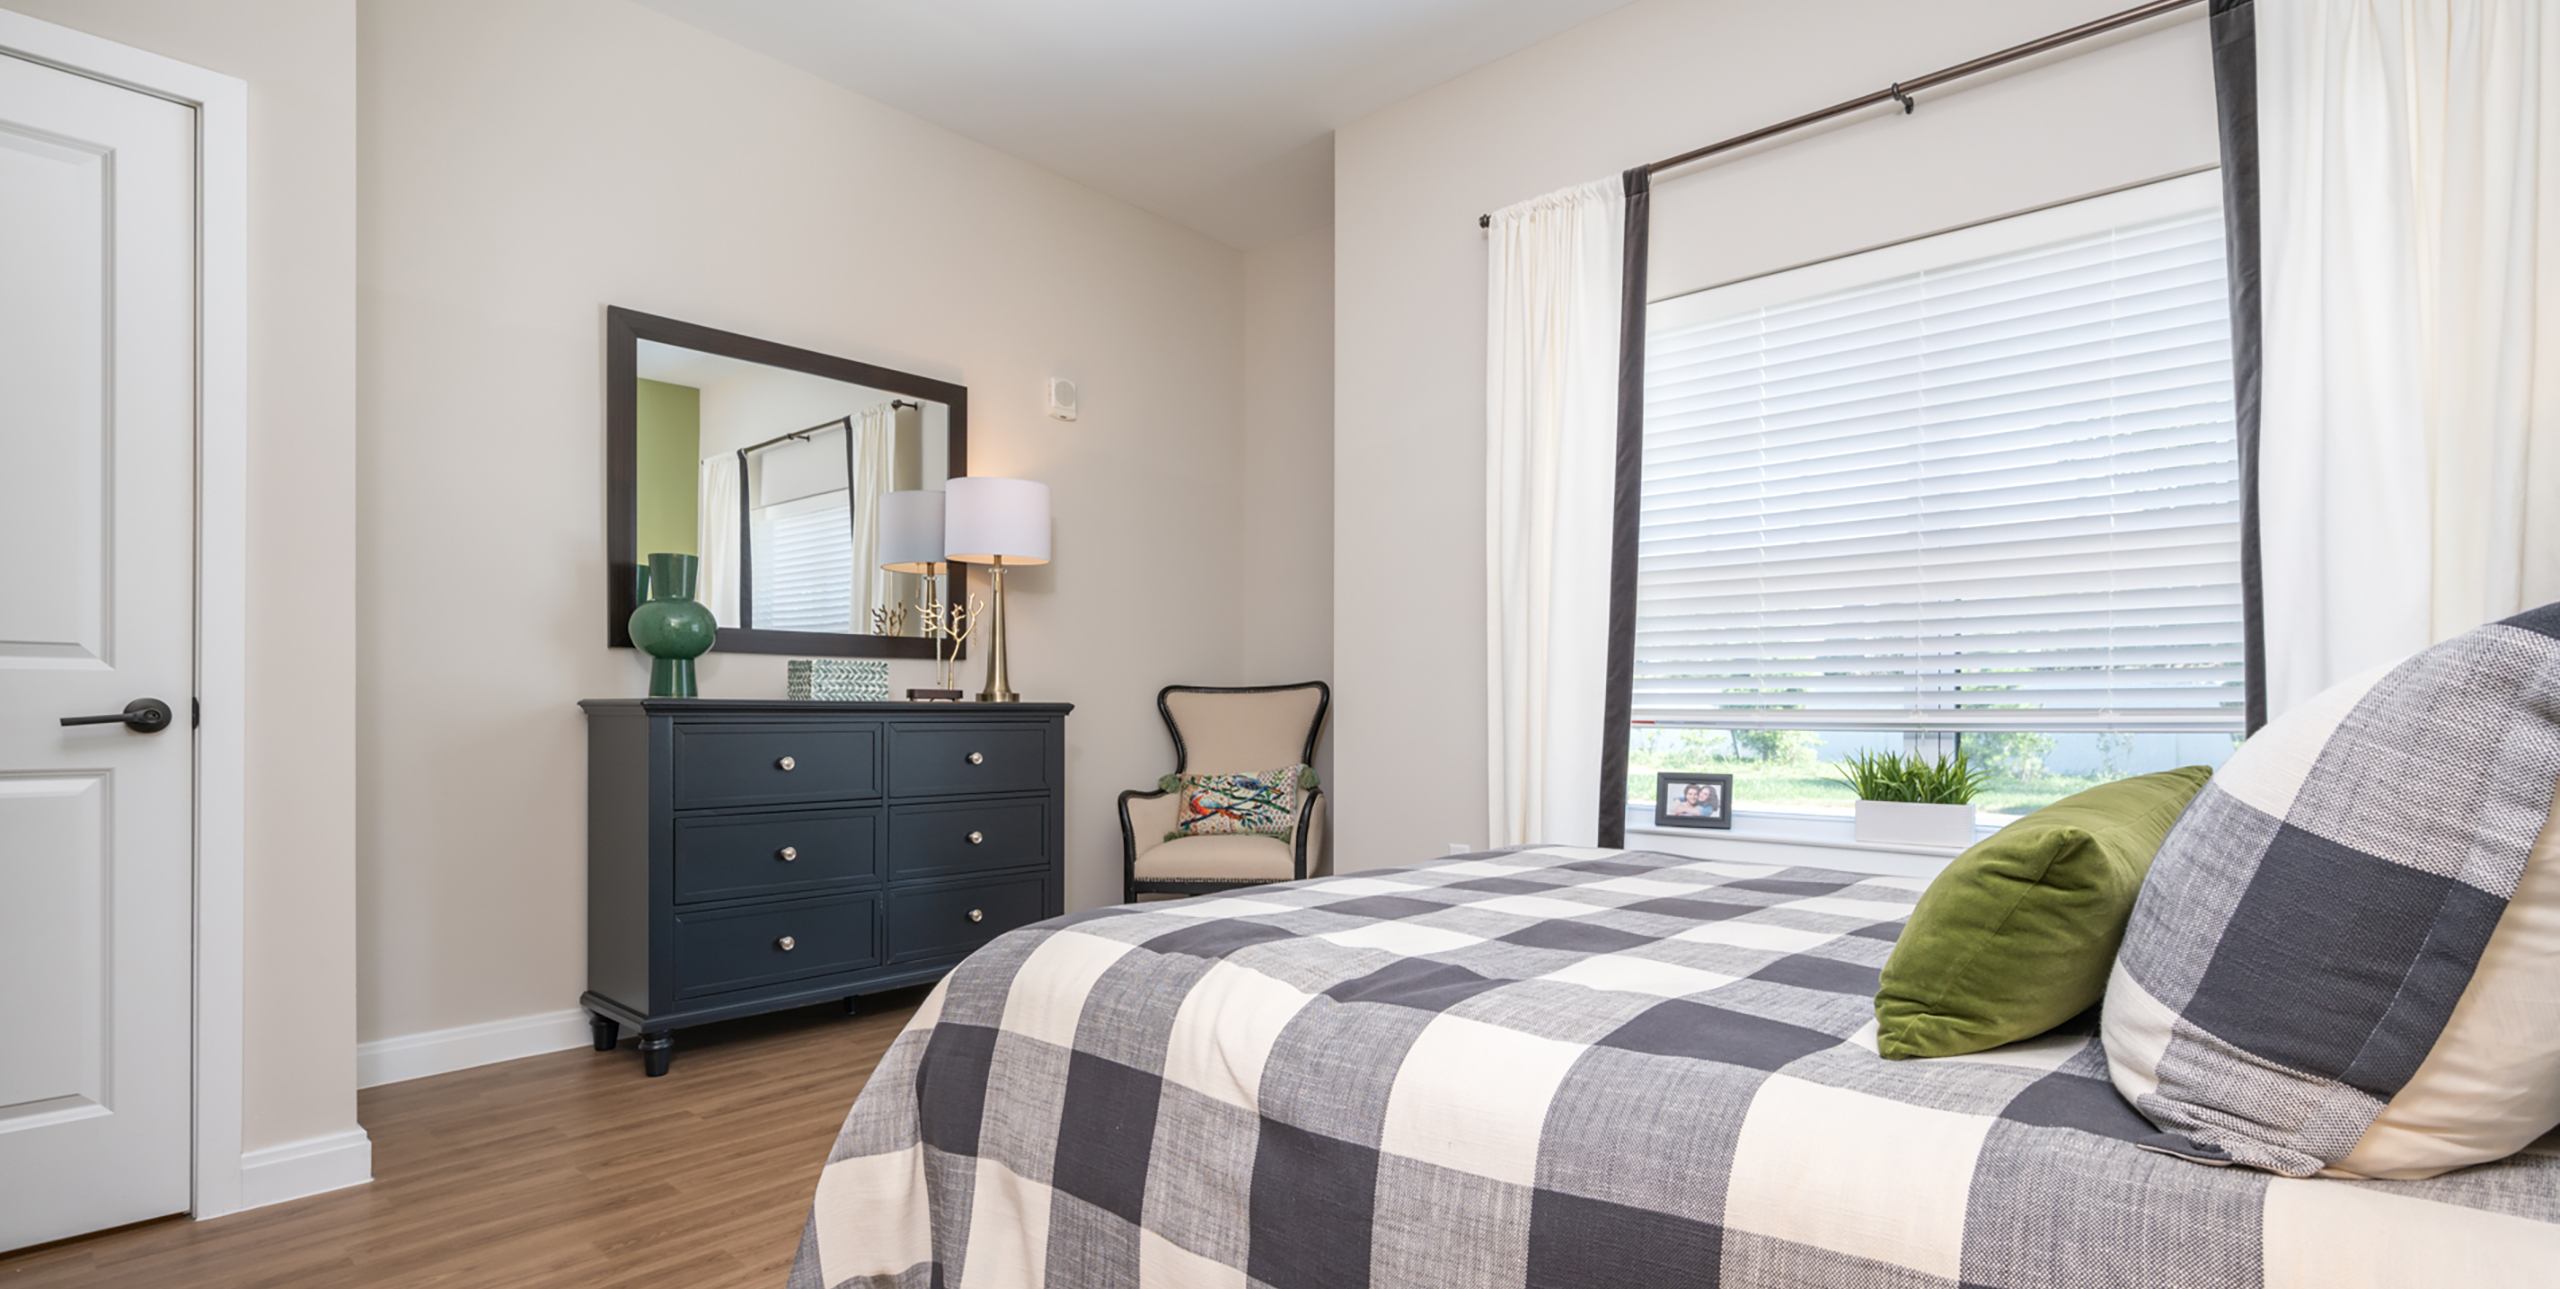 Bedroom with dresser, mirror and curtains at Brightview Senior Living Port Jeff